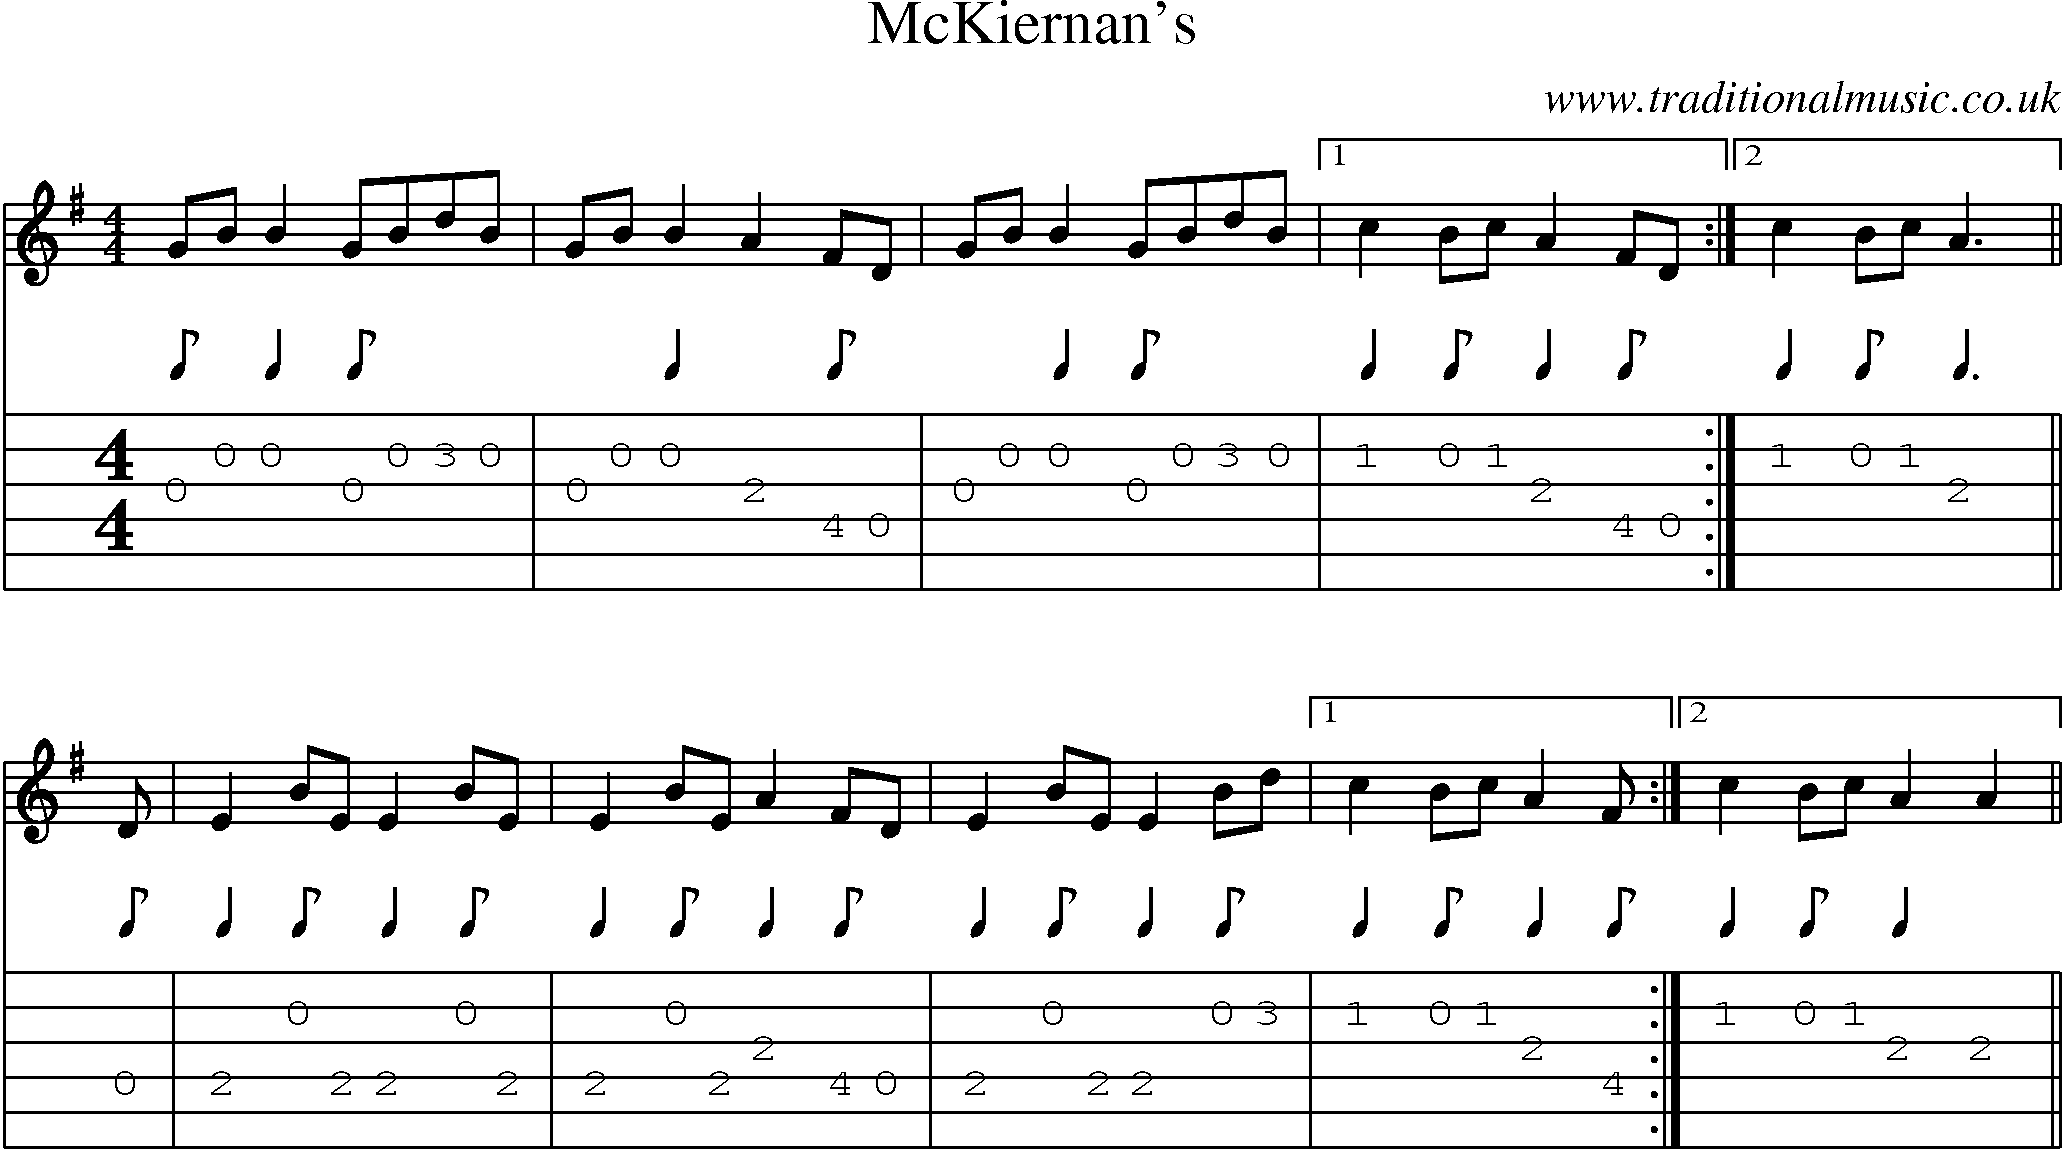 Music Score and Guitar Tabs for Mckiernans